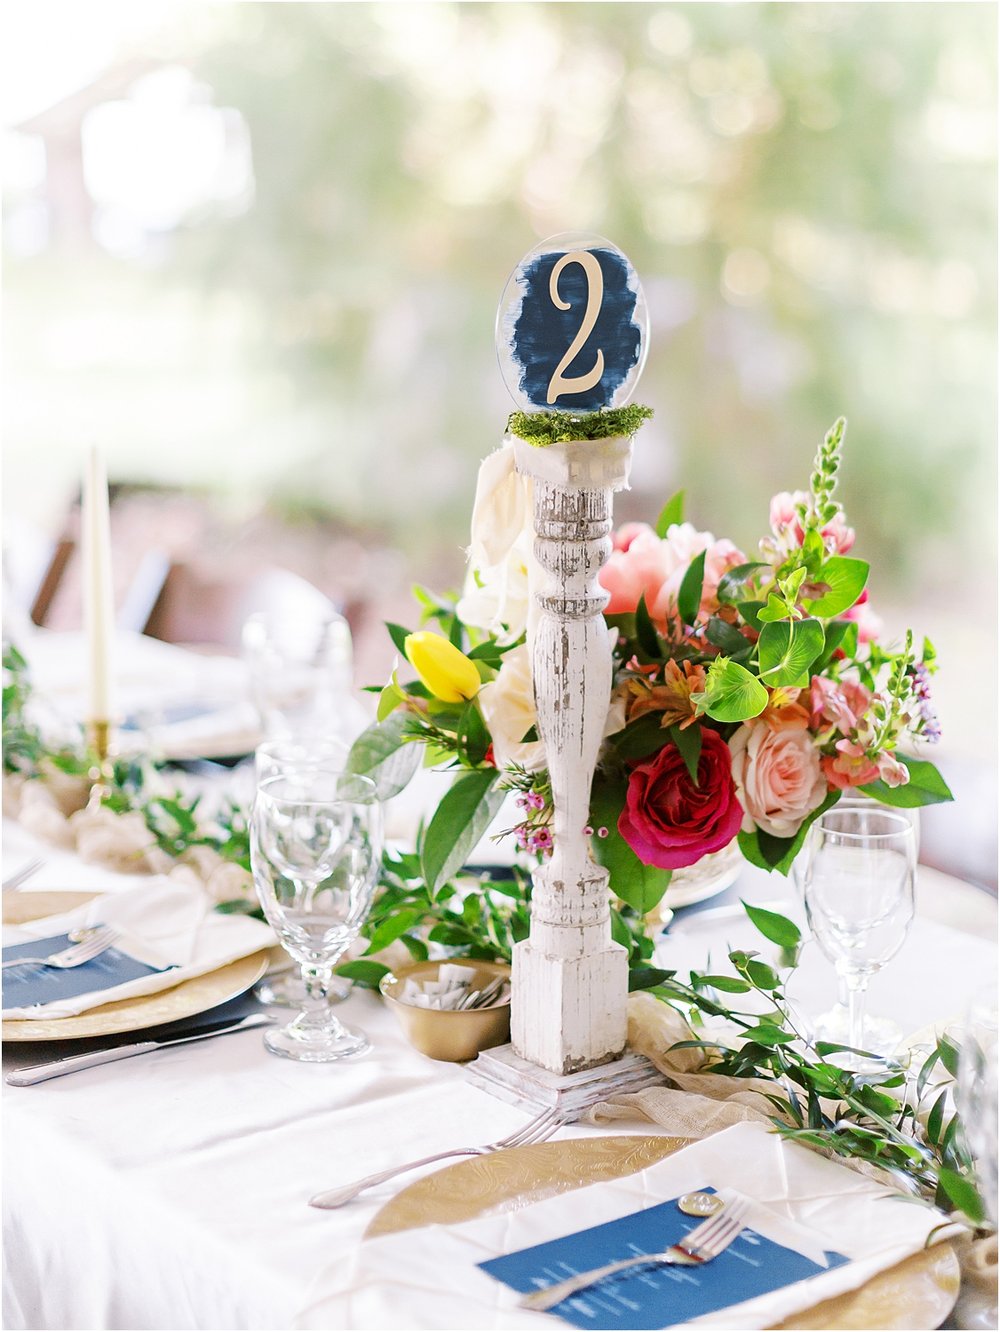 Southern elegance table settings and numbers